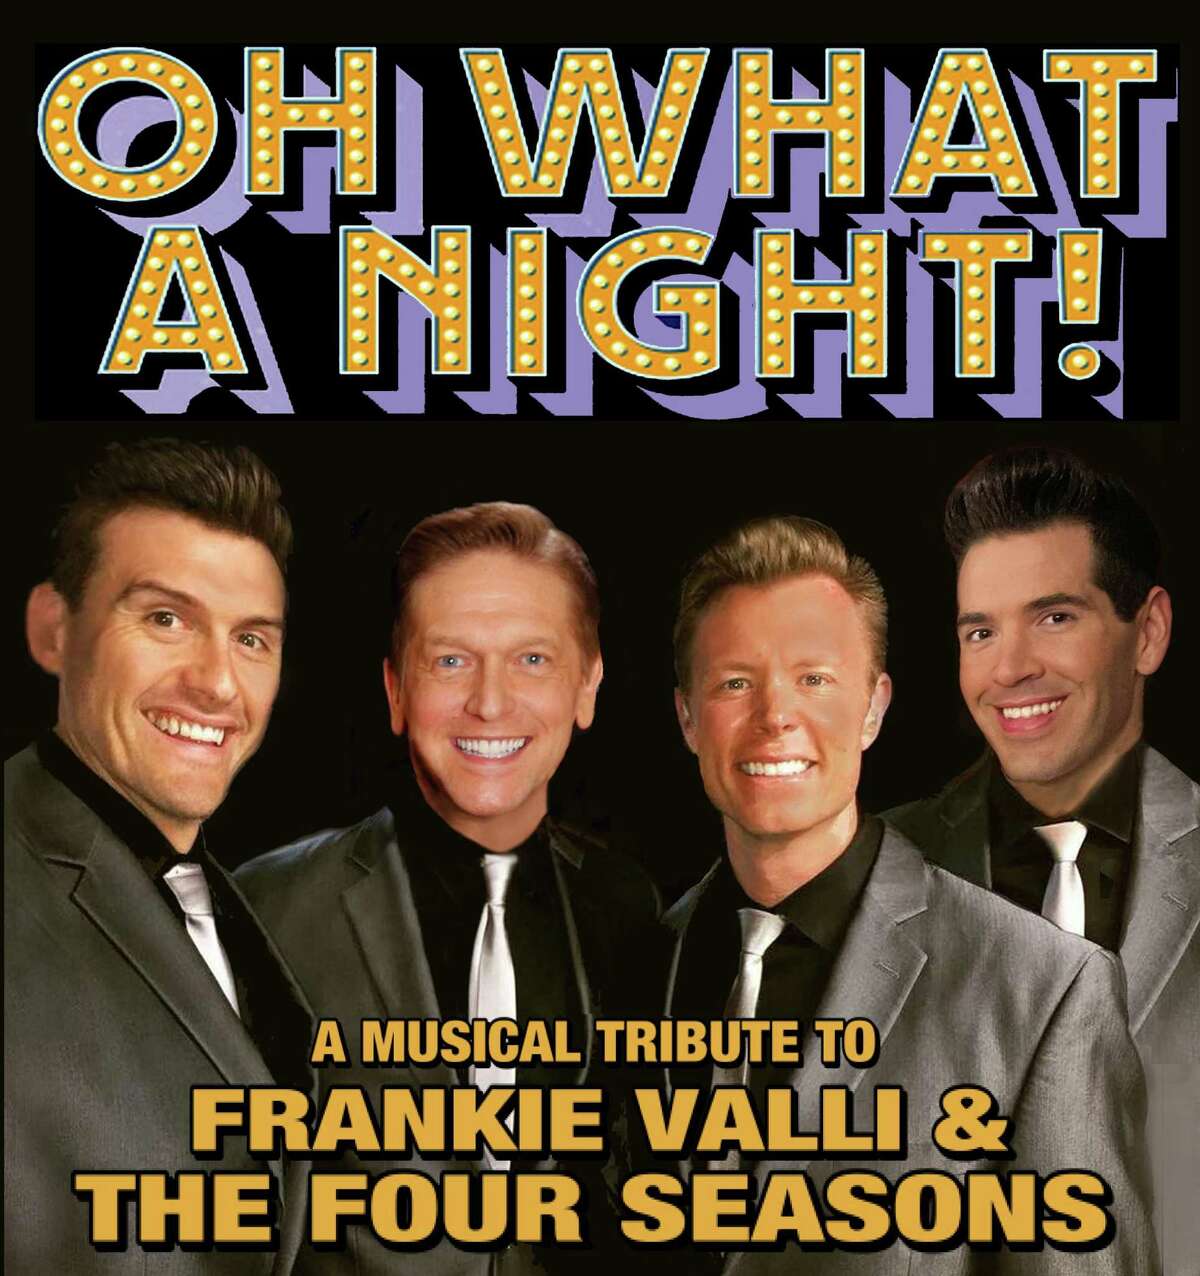 A musical tribute to singer Frankie Valli, and The Four Seasons singing group, and musical revue “Oh What A Night,” is coming to the Fairfield University’s Regina A. Quick Center for the Arts Sept. 10 at 7 p.m., a photo for the event, for which is shown. The performance will precede an Evening for the Arts reception at 6 p.m.